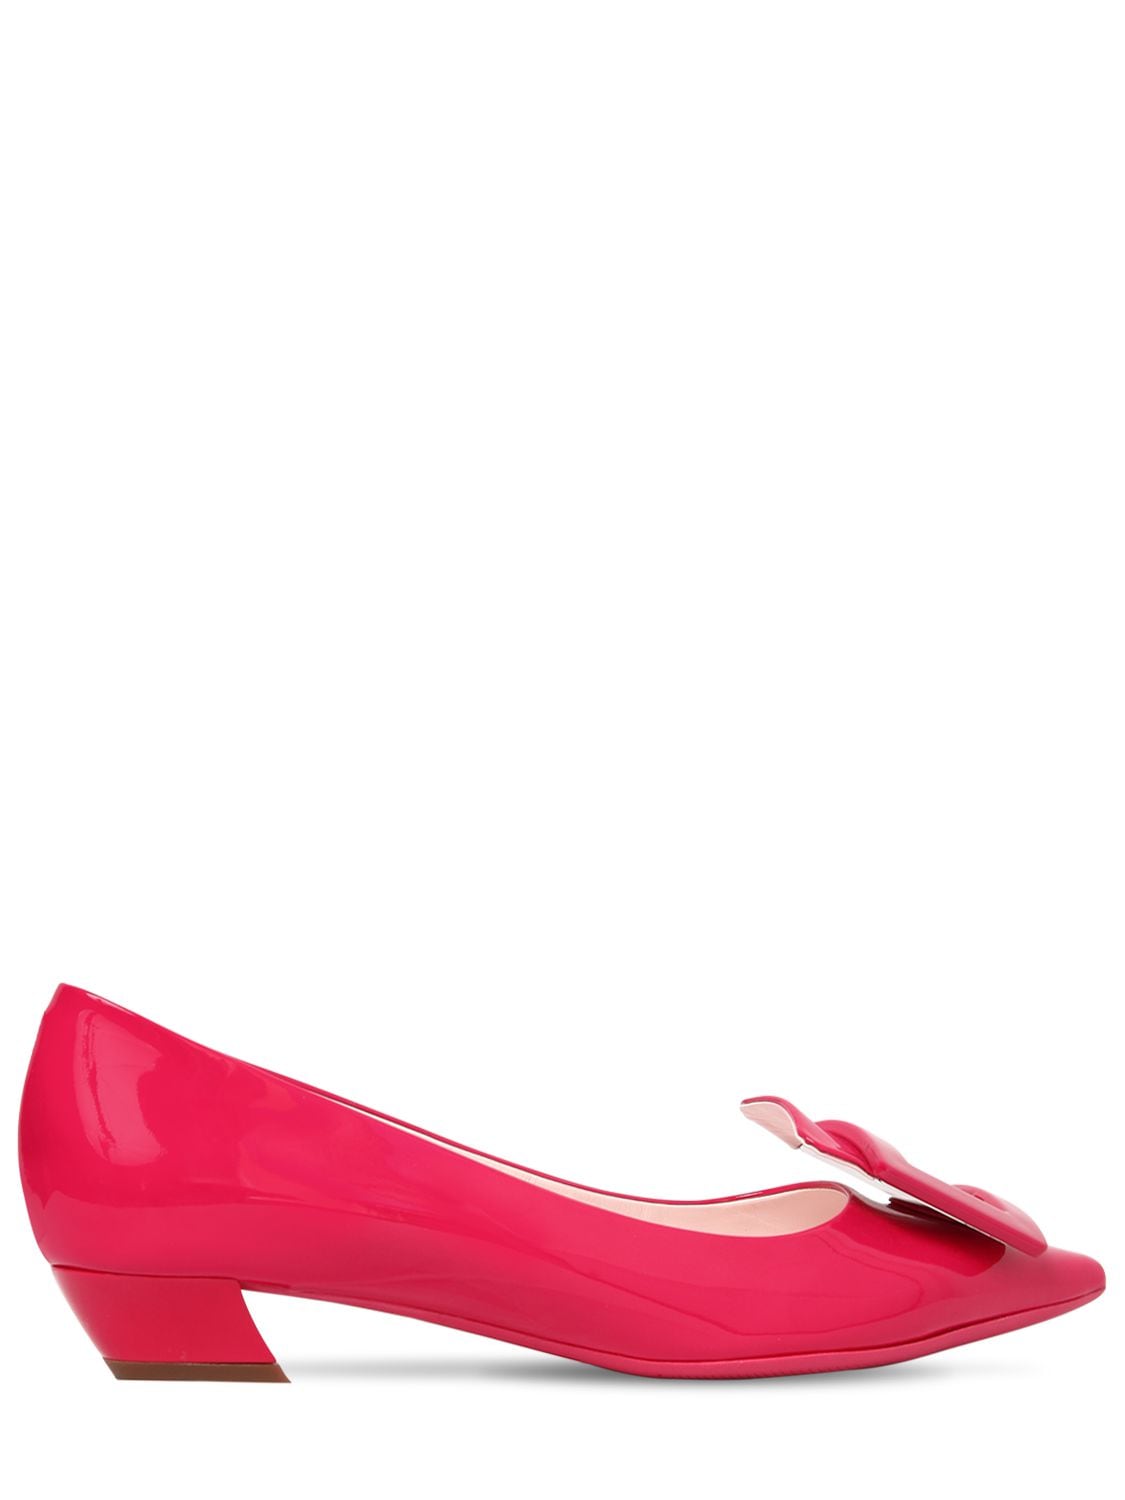 Roger Vivier 25mm Gommette Patent Leather Pumps In Fuchsia